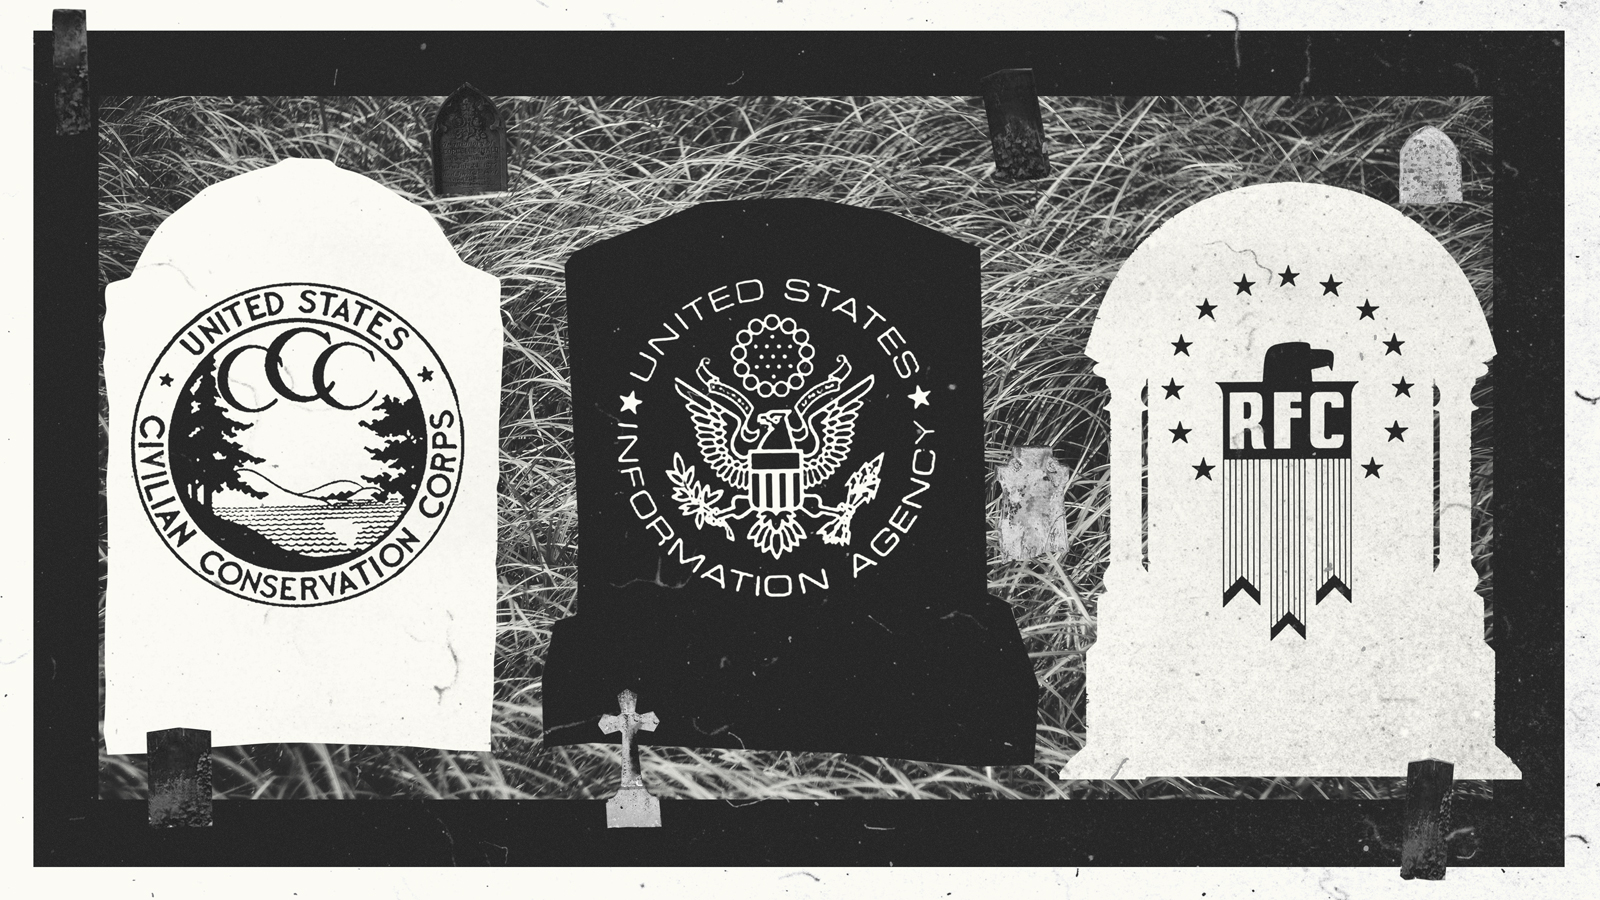 Collage showing three old tombstones with defunct government logos on them (The Civilian Conservation Corps, The US Information Agency, and the Reconstruction Finance Corporation)